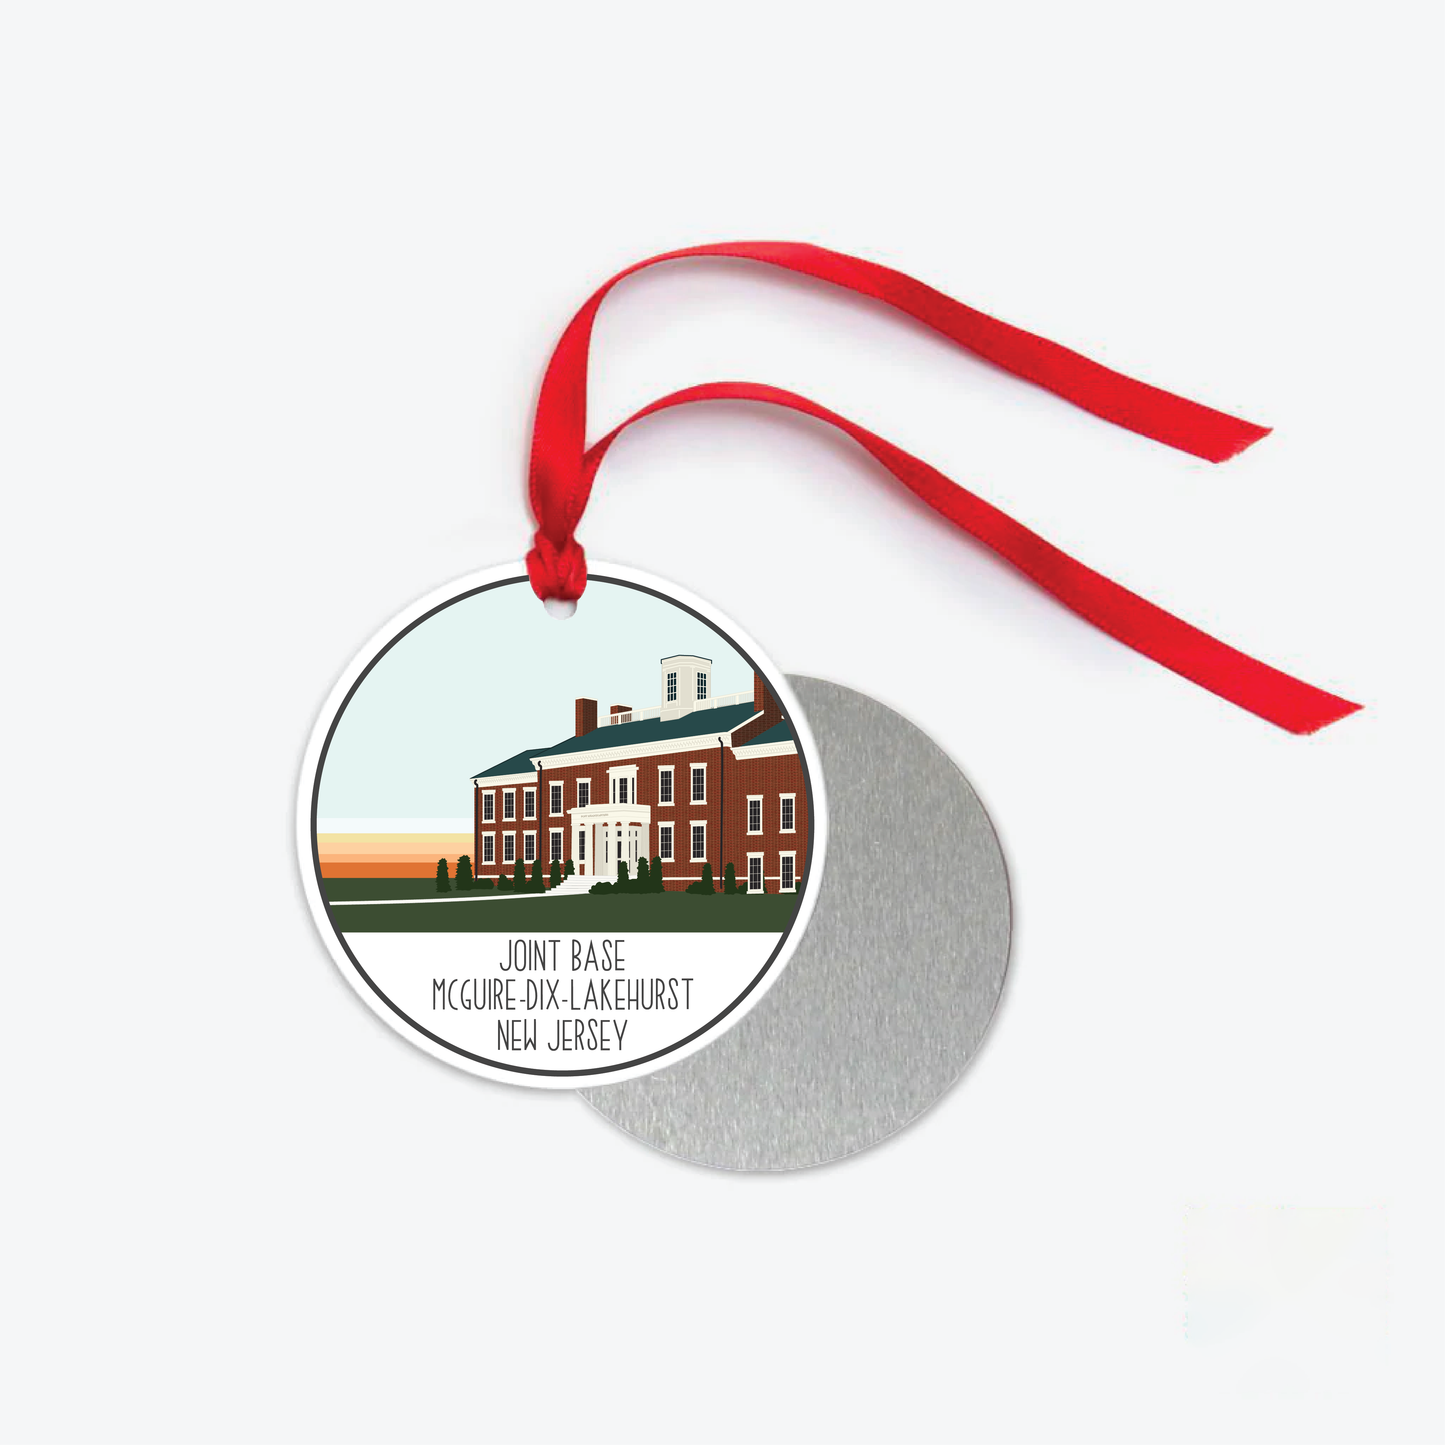 joint base mcguire-dix-lakehurst afb ornament one sided